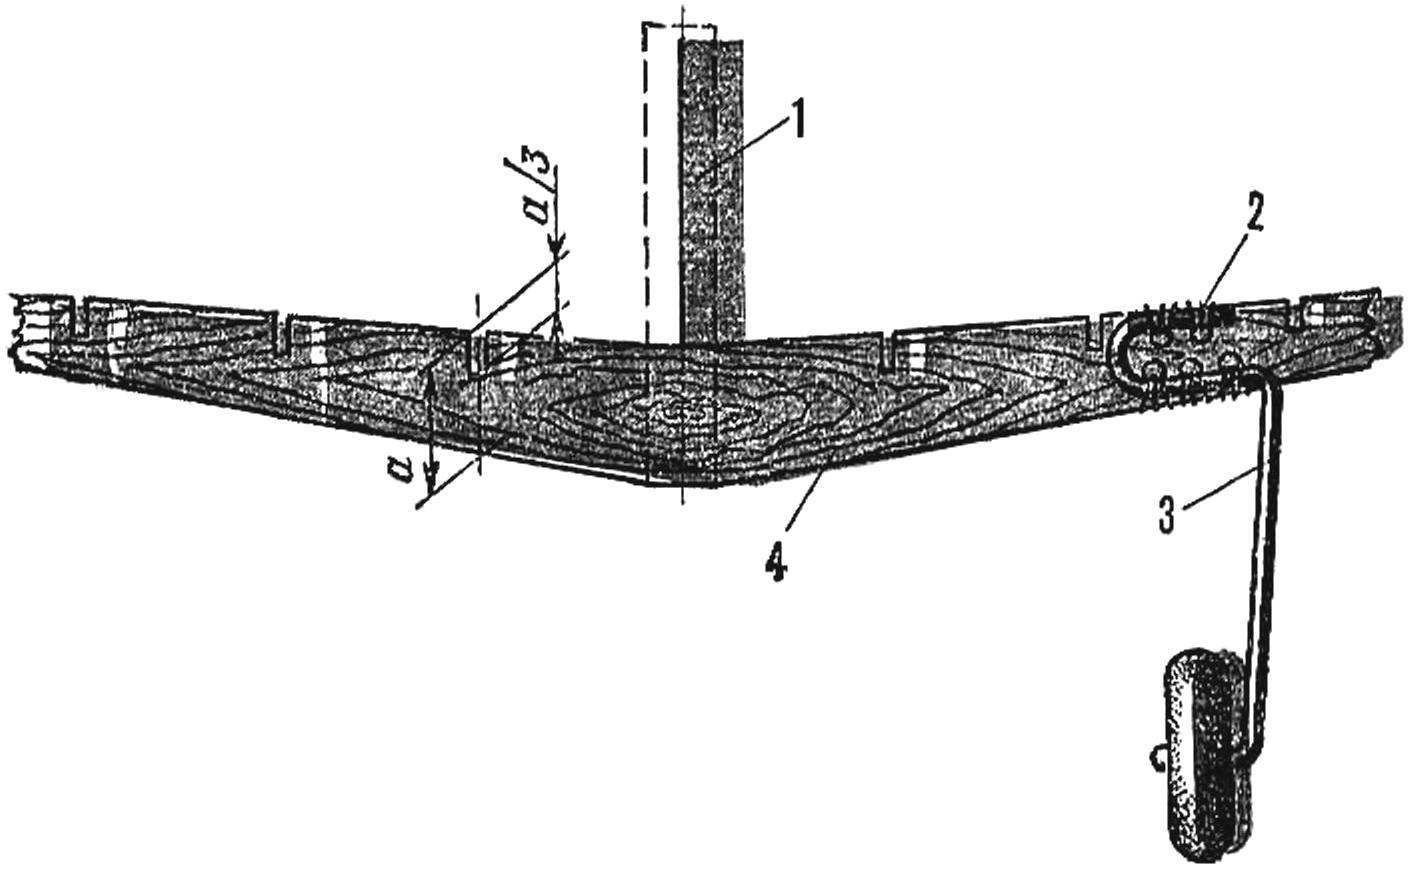 Fig. 8. Mount the landing gear to the wing spar